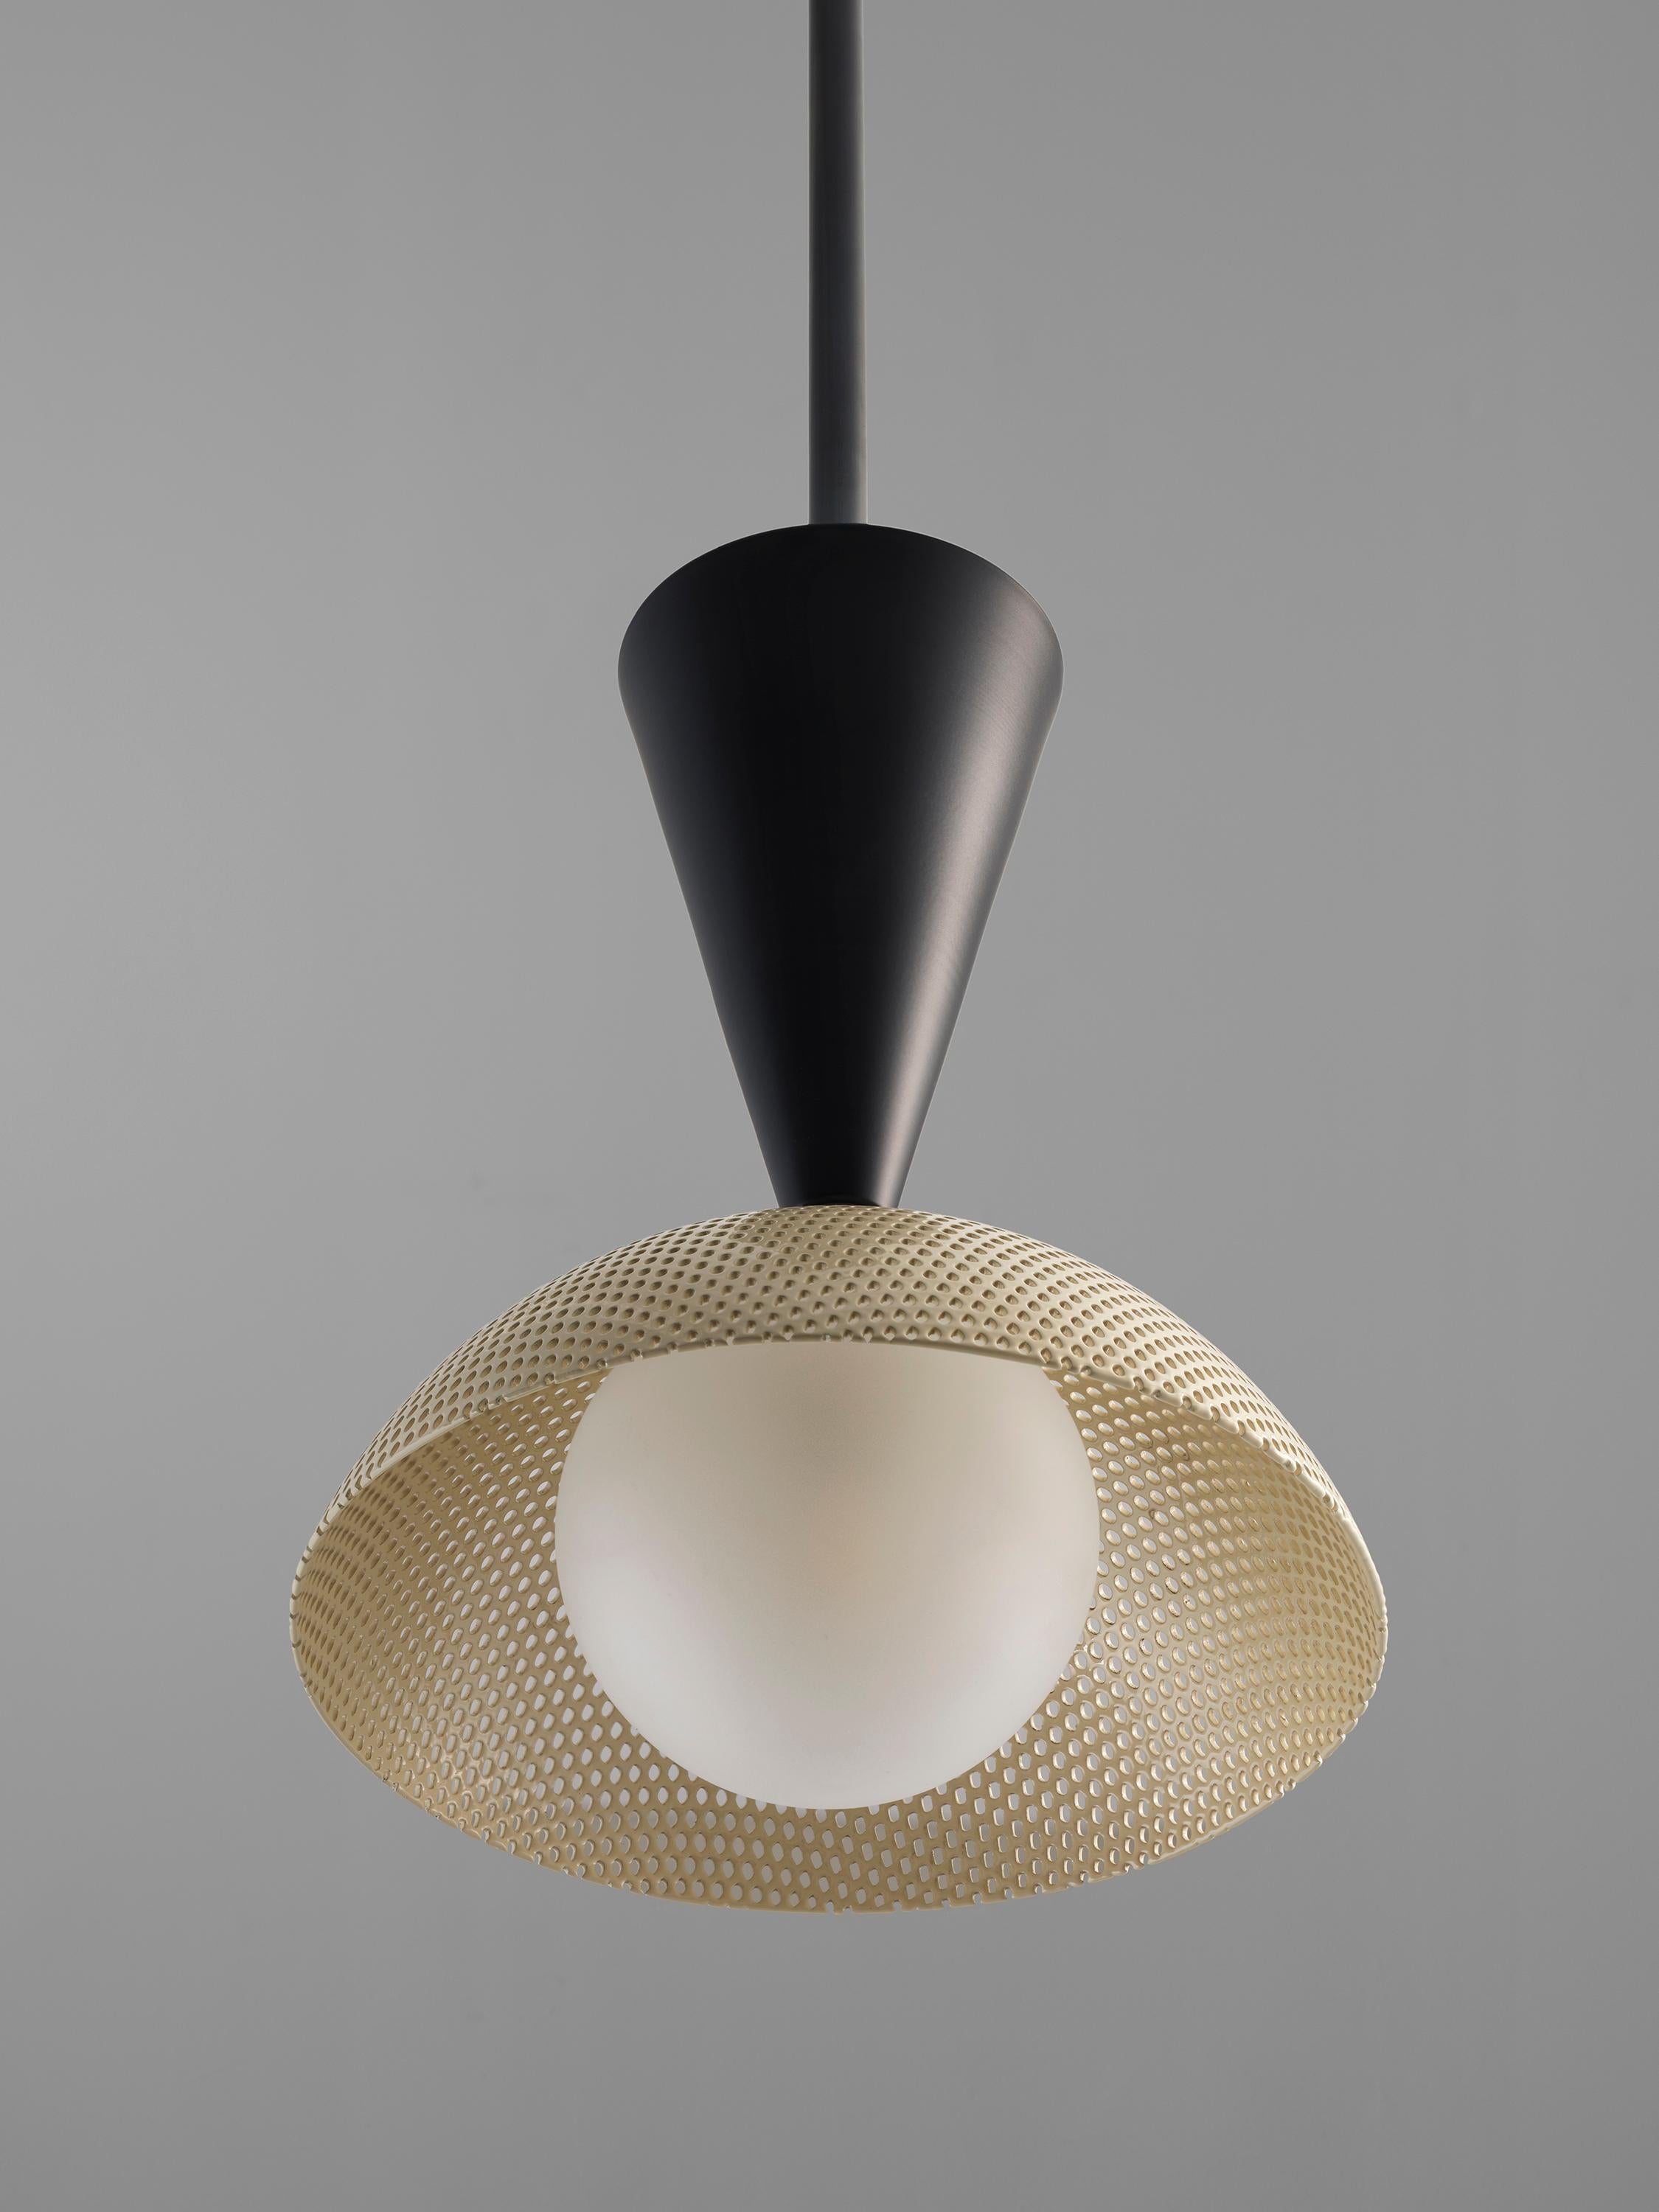 Powder-Coated MOLTO Pendant Light in Oil-Rubbed Bronze and Enameled Mesh by Blueprint Lighting For Sale